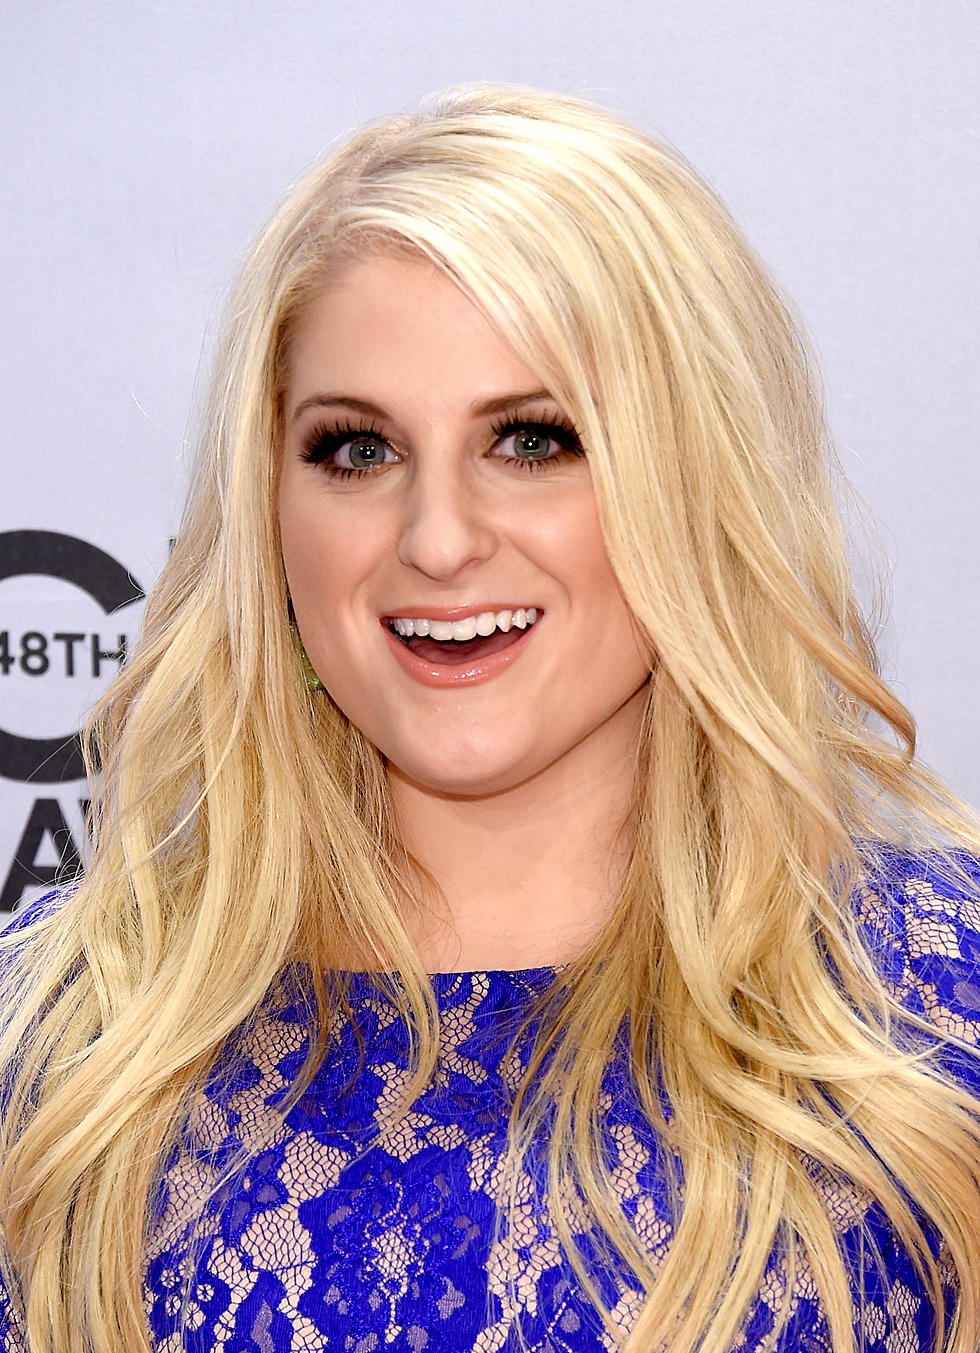 Singer Meghan Trainor attends the 2014 iHeartRadio Music Festival at  News Photo - Getty Images